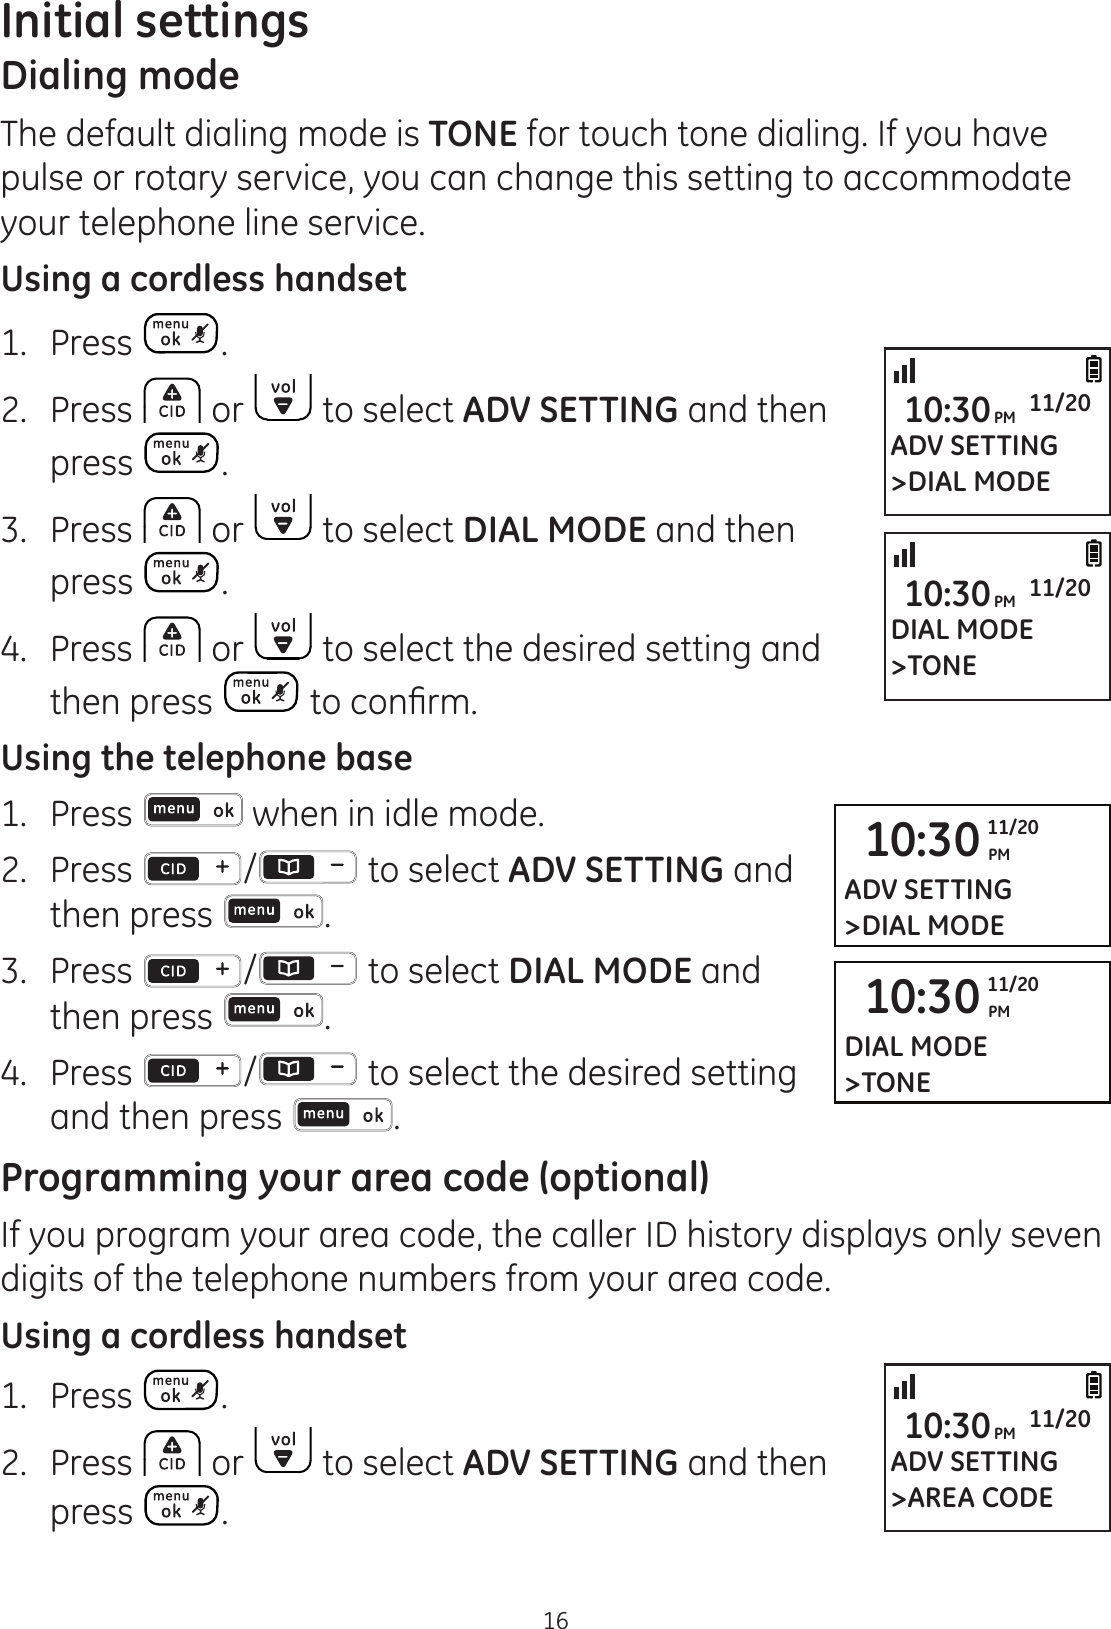 16Initial settingsDialing modeThe default dialing mode is TONE for touch tone dialing. If you have pulse or rotary service, you can change this setting to accommodate your telephone line service.Using a cordless handset1. Press .2.  Press   or   to select ADV SETTING and then press  .3.  Press   or   to select DIAL MODE and then press  .4.  Press   or   to select the desired setting and then press  WRFRQ¿UPUsing the telephone base1.   Press   when in idle mode. 2.   Press  /  to select ADV SETTING and then press  . 3.   Press  /  to select DIAL MODE and then press  . 4.   Press  /  to select the desired setting and then press  . Programming your area code (optional)If you program your area code, the caller ID history displays only seven digits of the telephone numbers from your area code. Using a cordless handset1.  Press  .2.  Press   or   to select ADV SETTING and then  press  .10:30 PM11/20ADV SETTING&gt;DIAL MODE10:30 PM11/20DIAL MODE&gt;TONEADV SETTING&gt;DIAL MODE10:30PM 11/20DIAL MODE&gt;TONE10:30PM 11/20ADV SETTING&gt;AREA CODE10:30PM 11/20